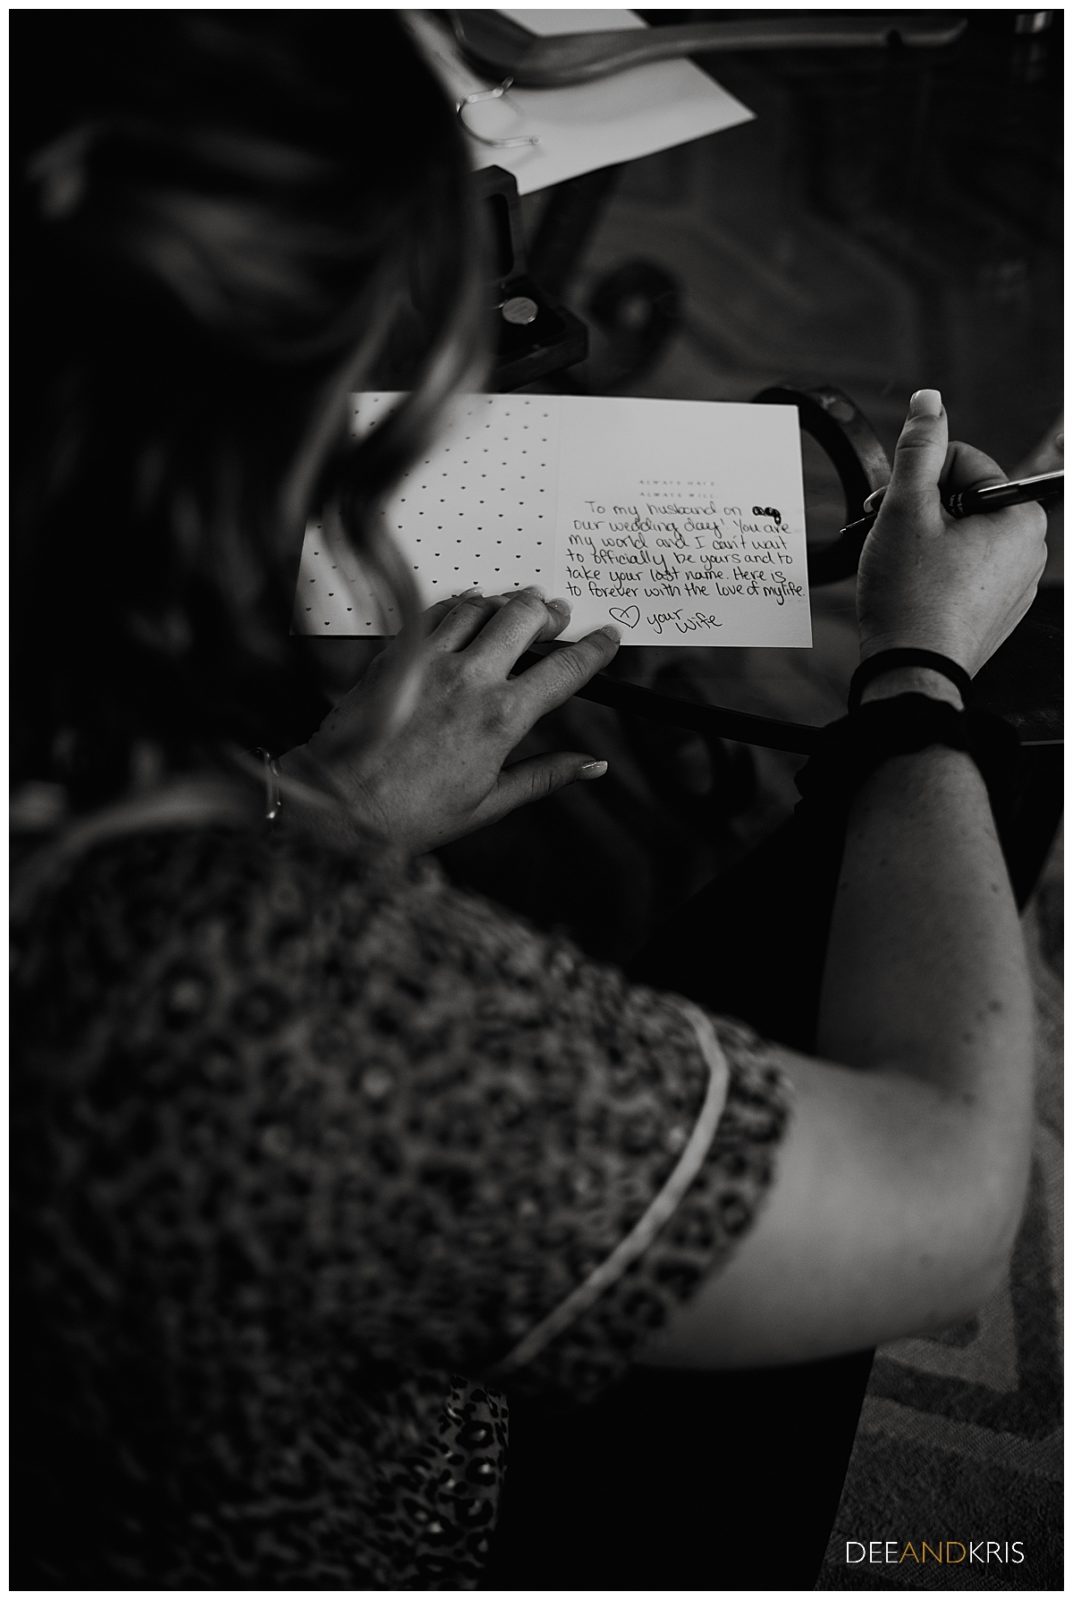 One black and white image of the bride writing out a card for the groom.